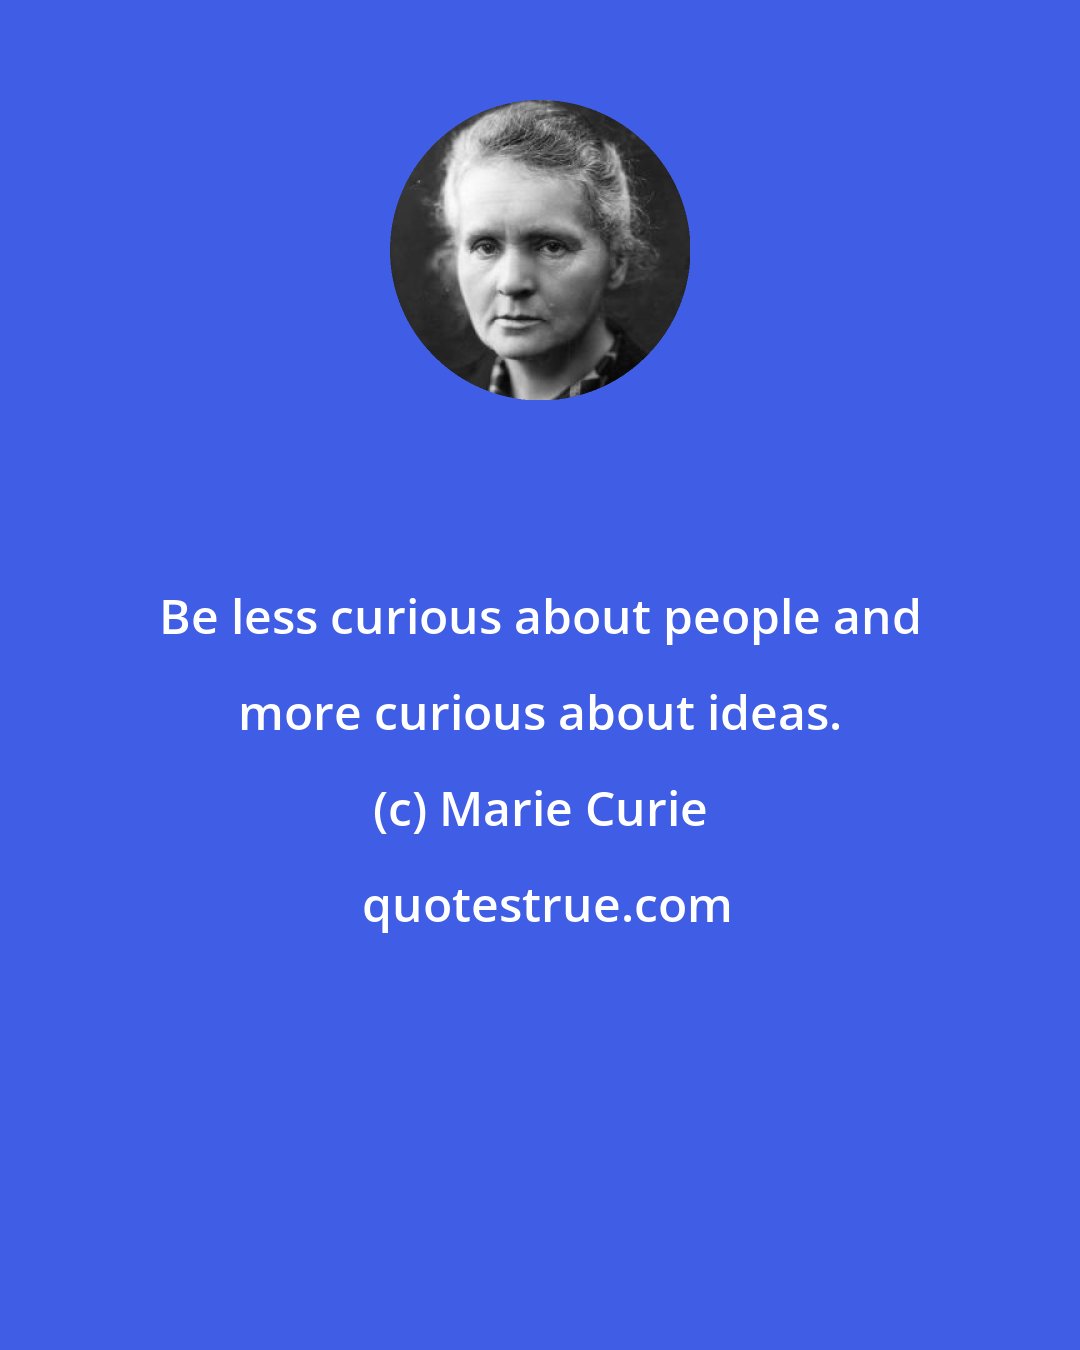 Marie Curie: Be less curious about people and more curious about ideas.